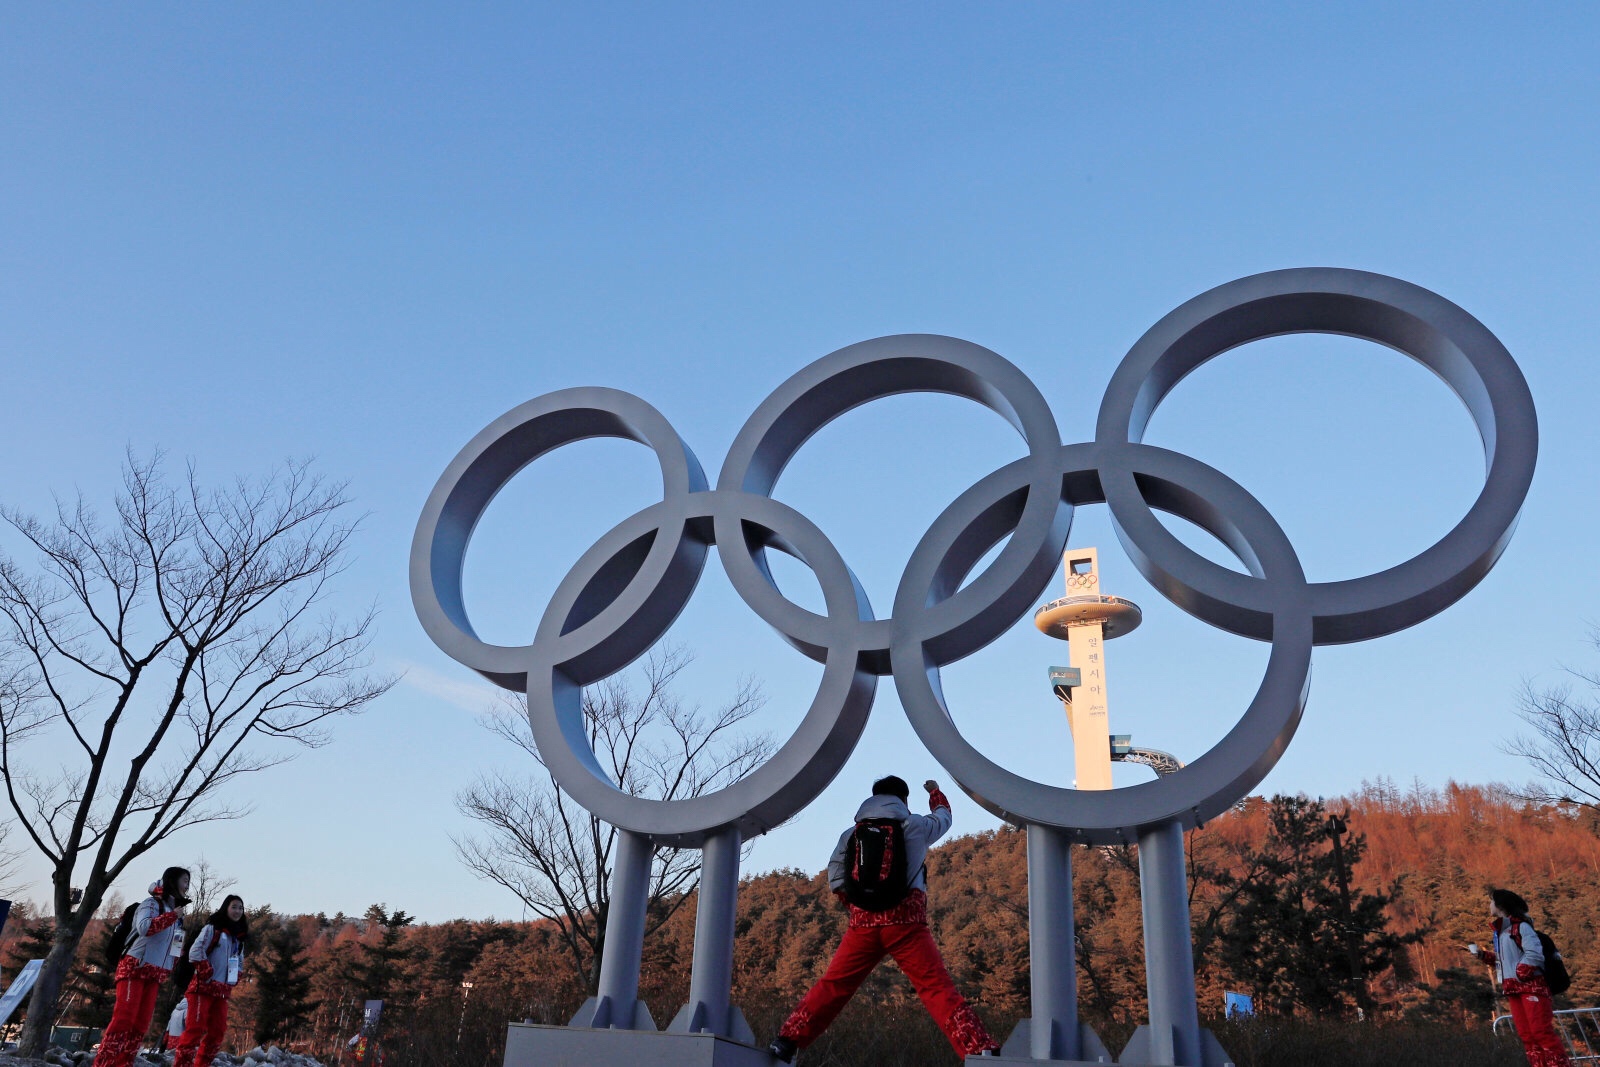 Snapchat and NBC are gearing up their partnership on Winter Olympics